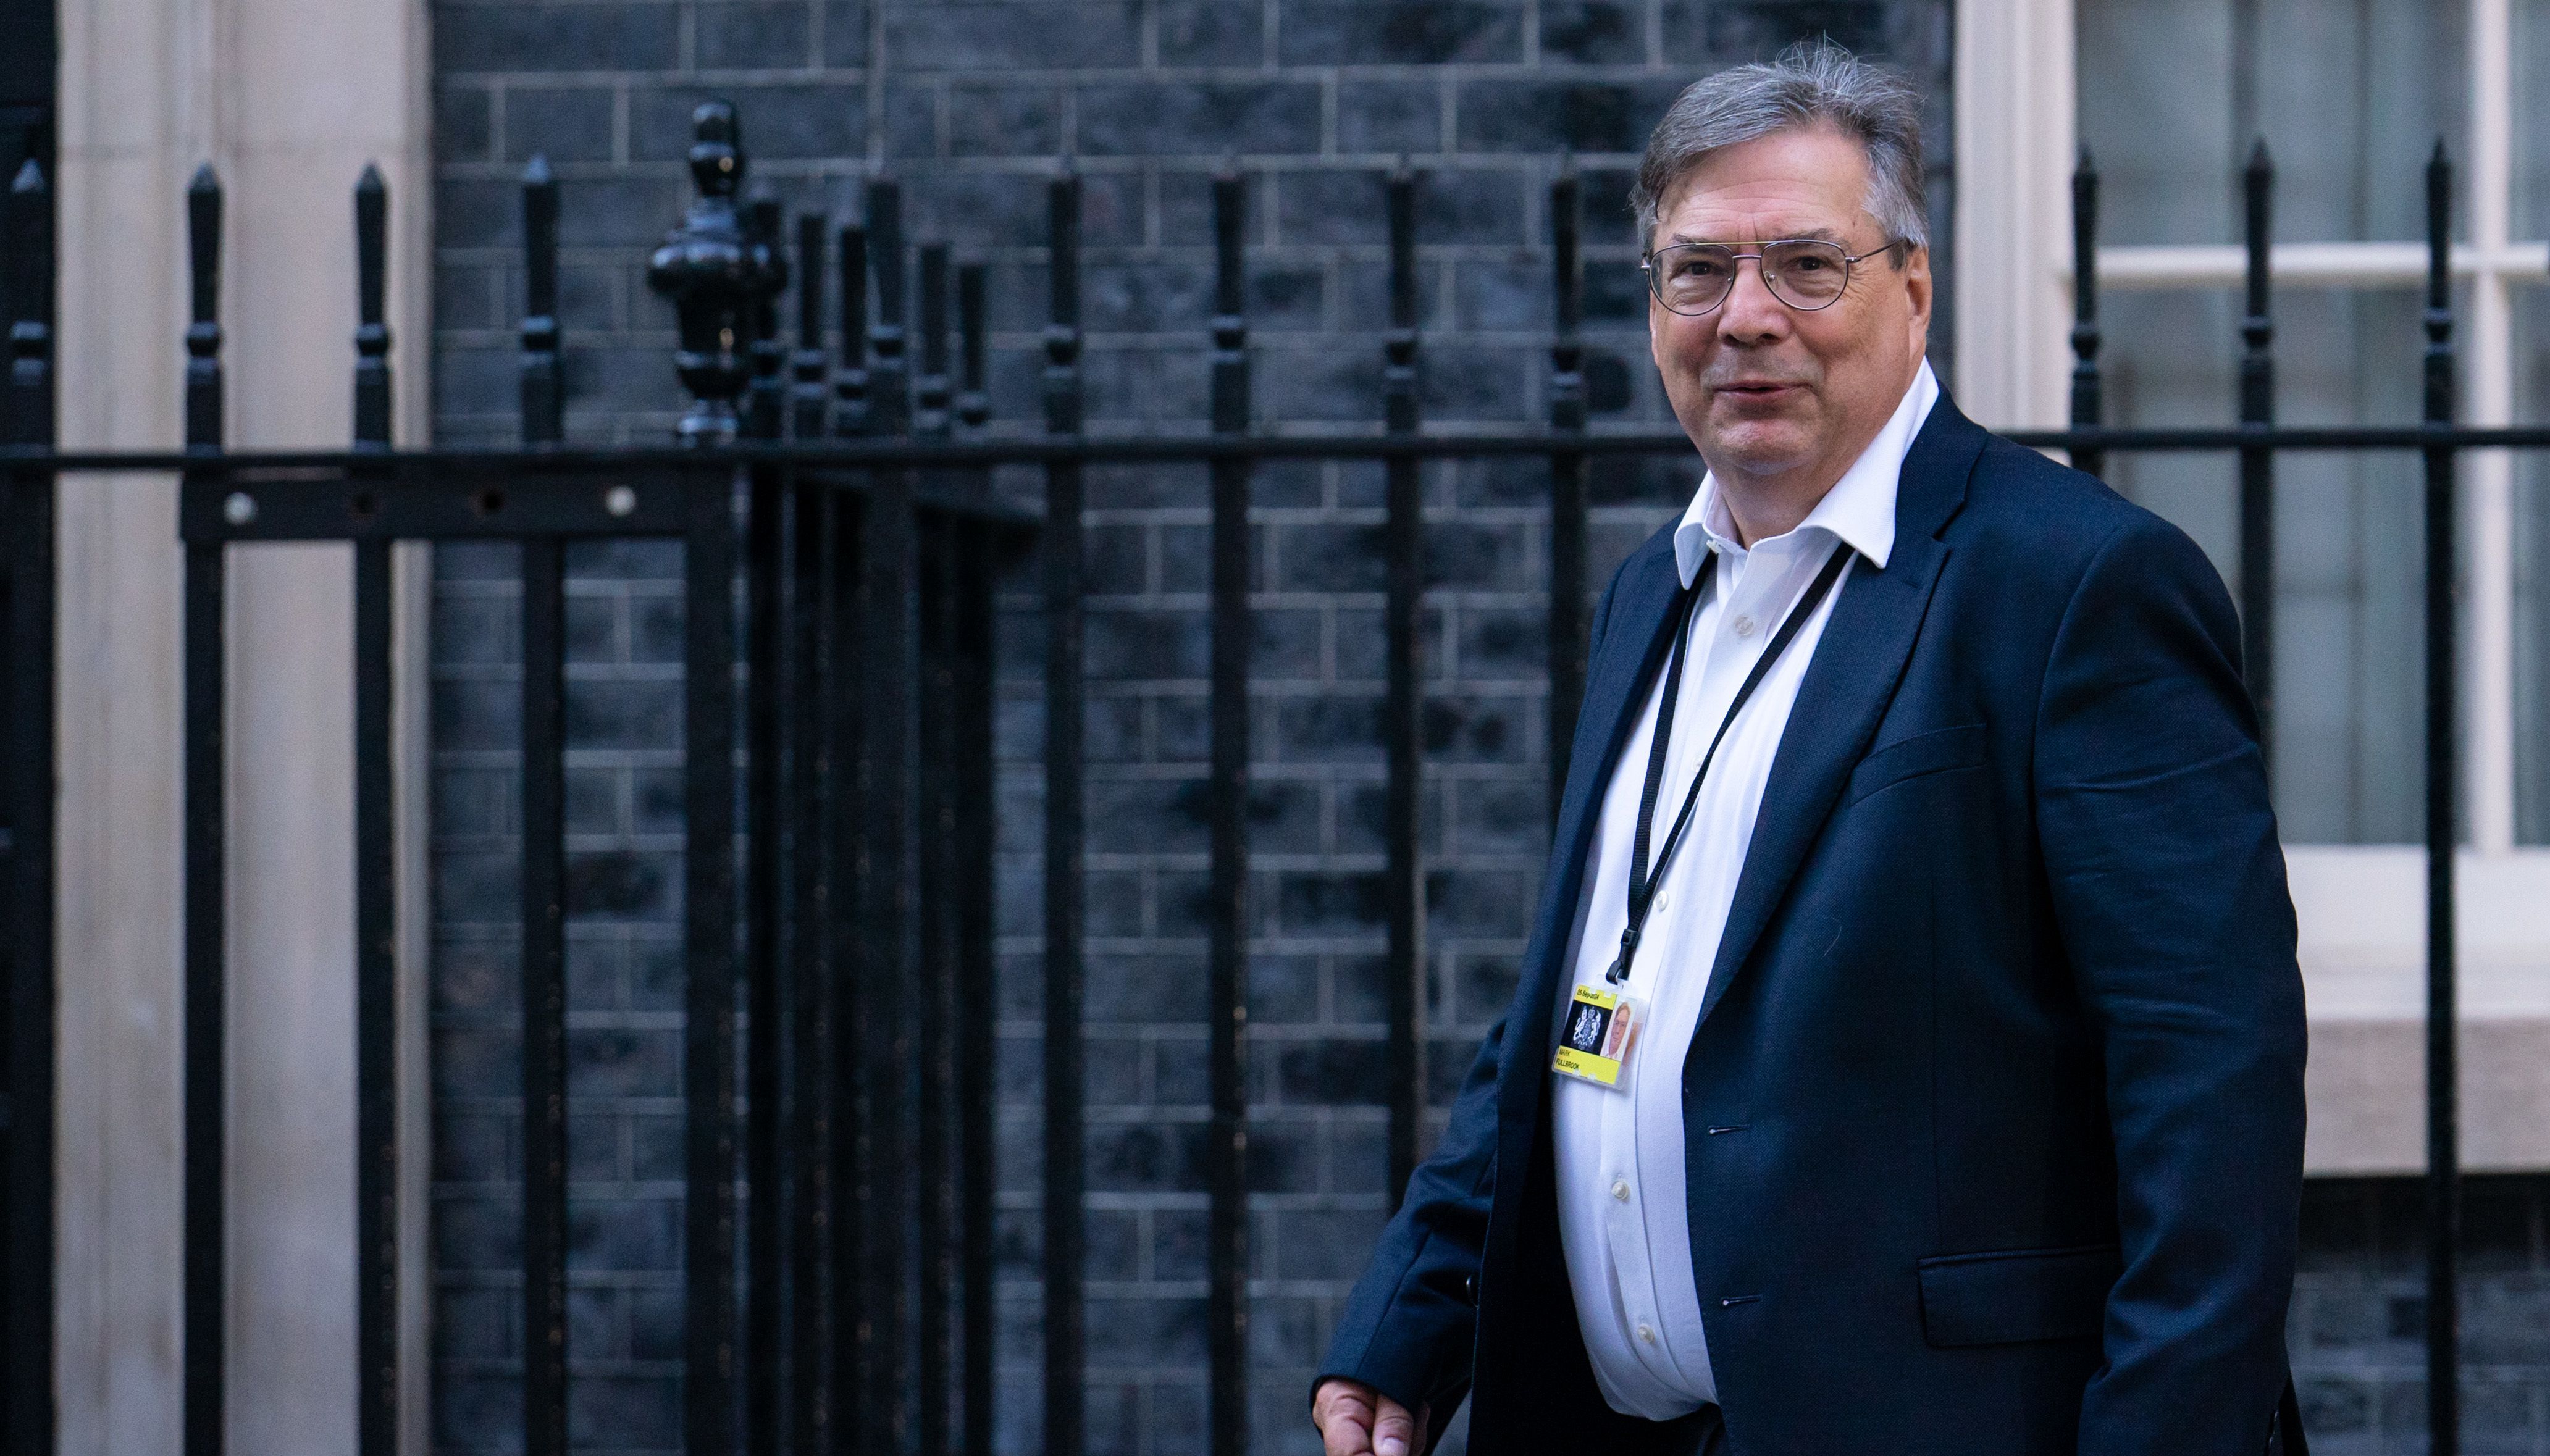 Number 10 Chief of Staff Mark Fullbrook leaving after a meeting with the new Prime Minister Liz Truss at Downing Street, London. Picture date: Wednesday September 7, 2022.